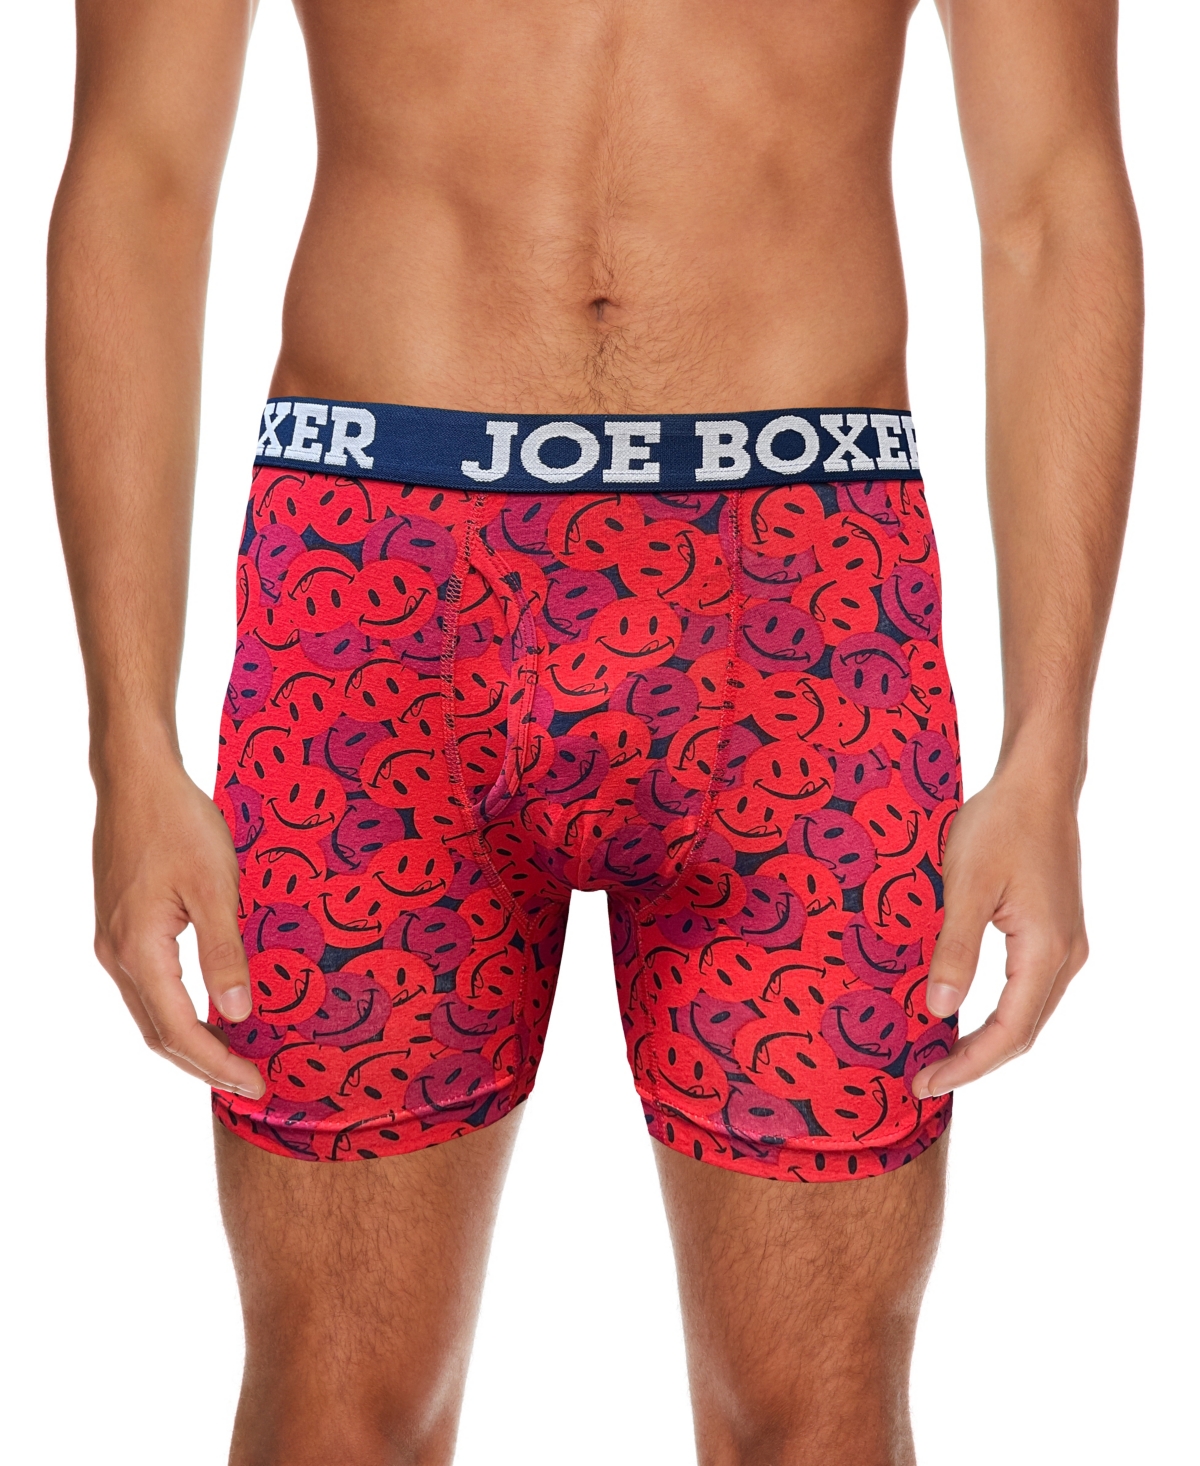 Joe Boxer Men's Licky Icons Stretch Boxer Briefs, Pack of 4